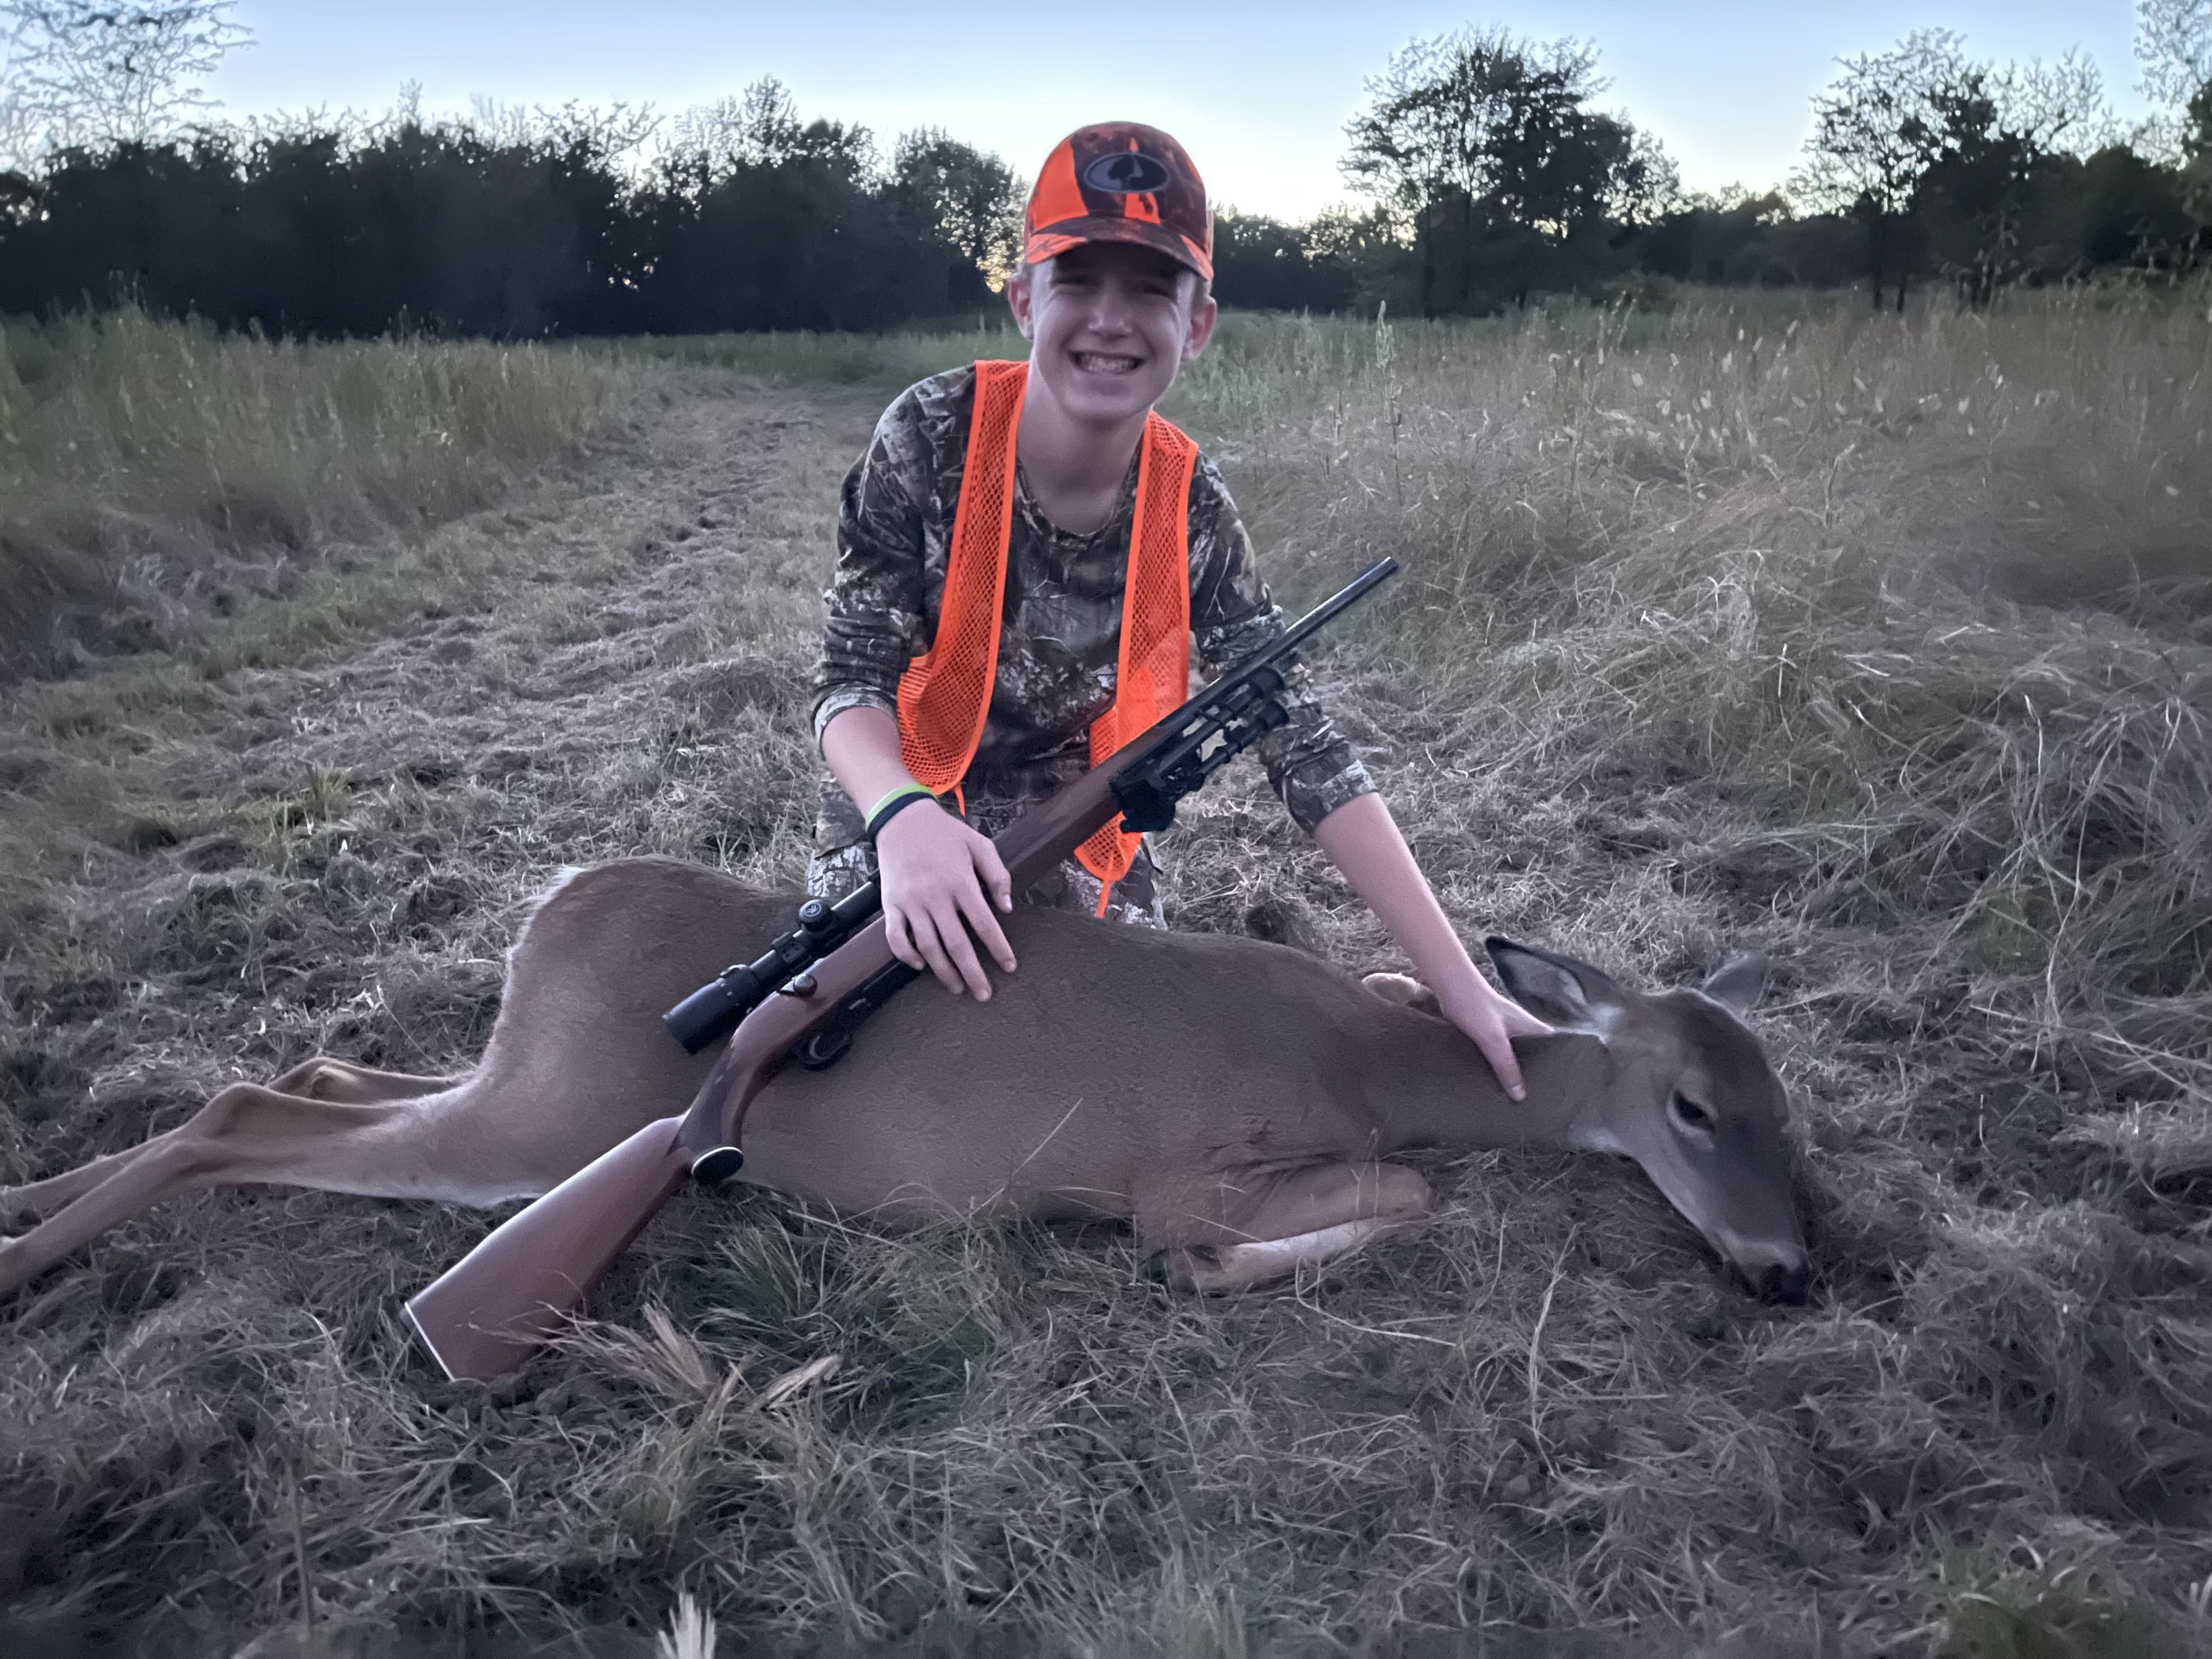 Youth hunt promotes outdoor recreation and manages wildlife population